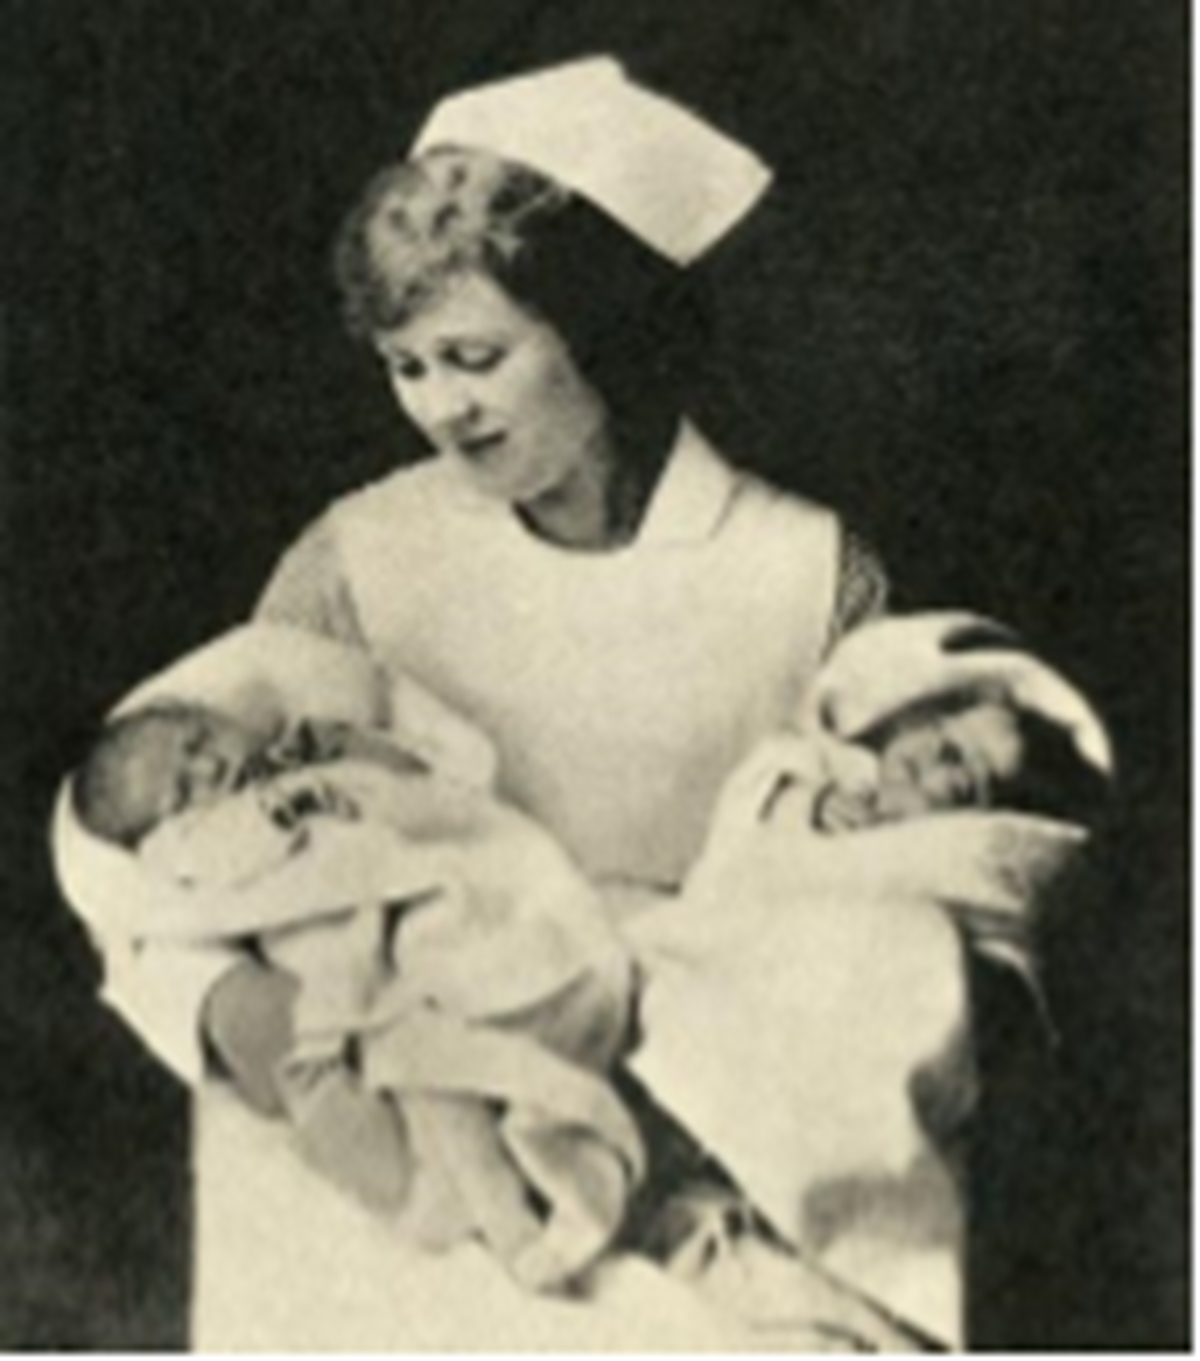 Centennial Stories: Childbirth changes with the times